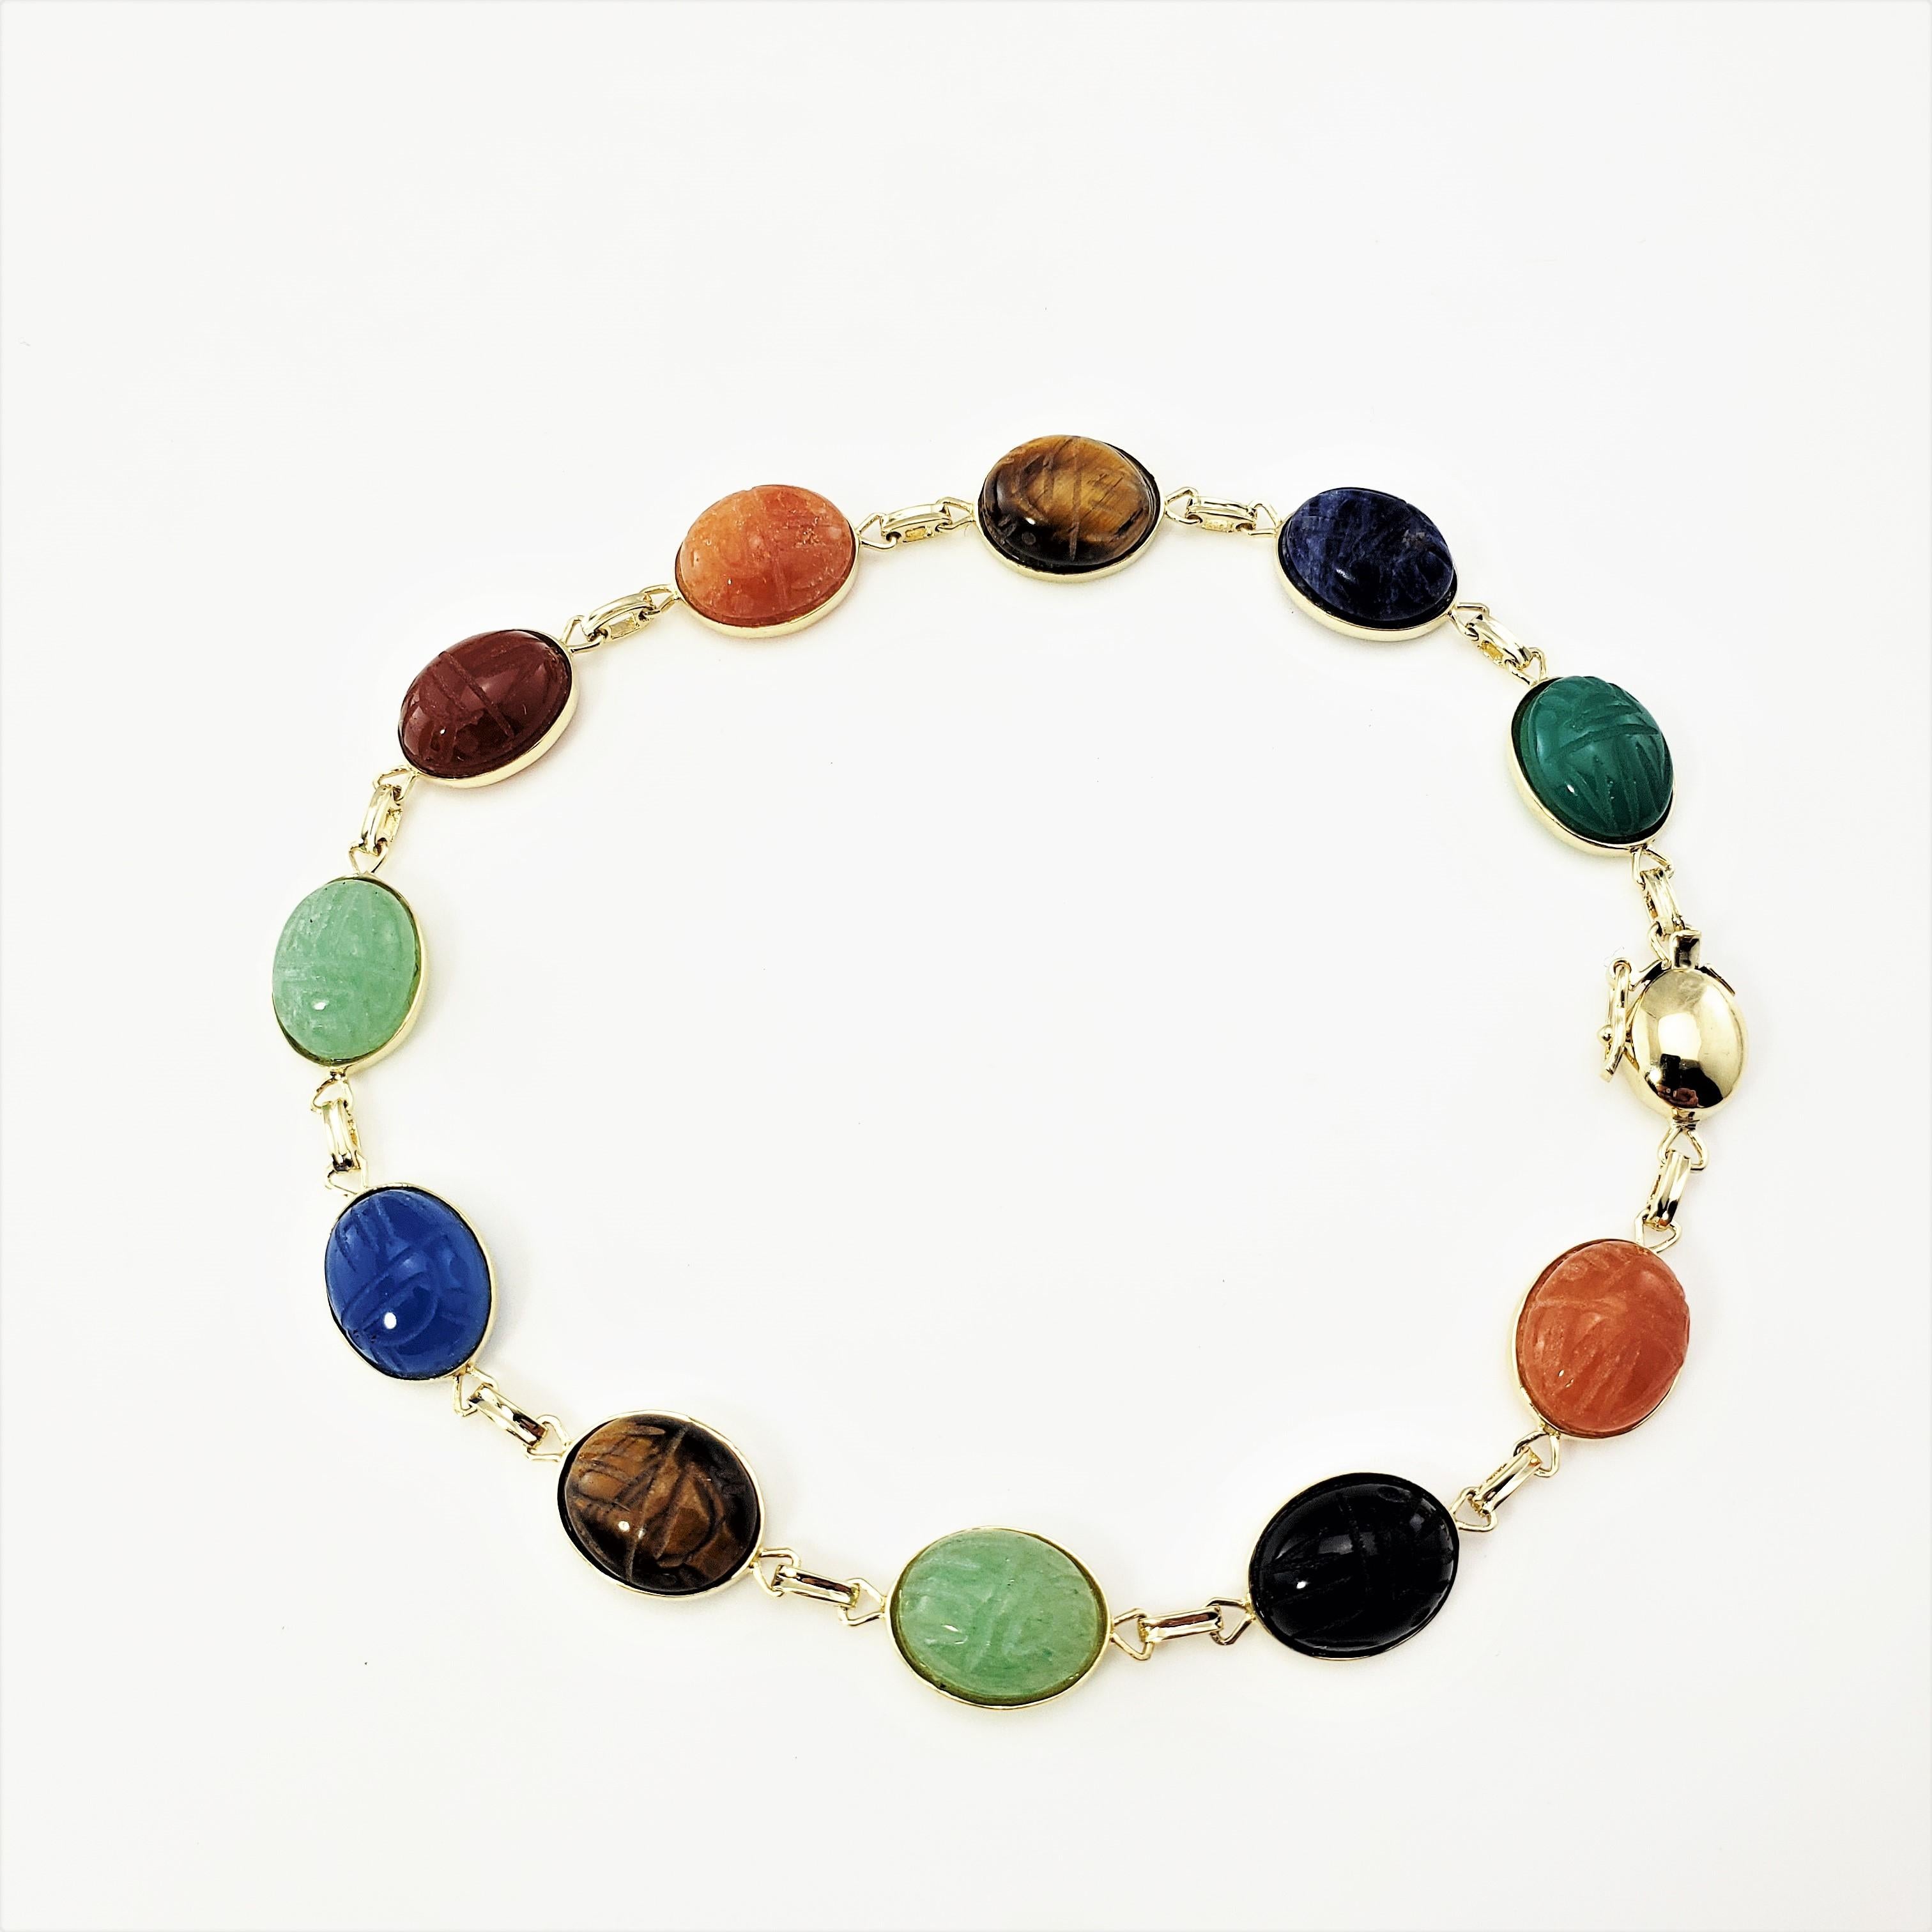 14 Karat Yellow Gold Scarab Bracelet-

This lovely scarab bracelet features 11 gemstones (jade, carnelian, lapis lazuli, onyx, tiger's eye) set in beautifully detailed 14K yellow gold.  Each stone measures 10 mm x 8 mm.

Size:  8.25 inches

Weight: 